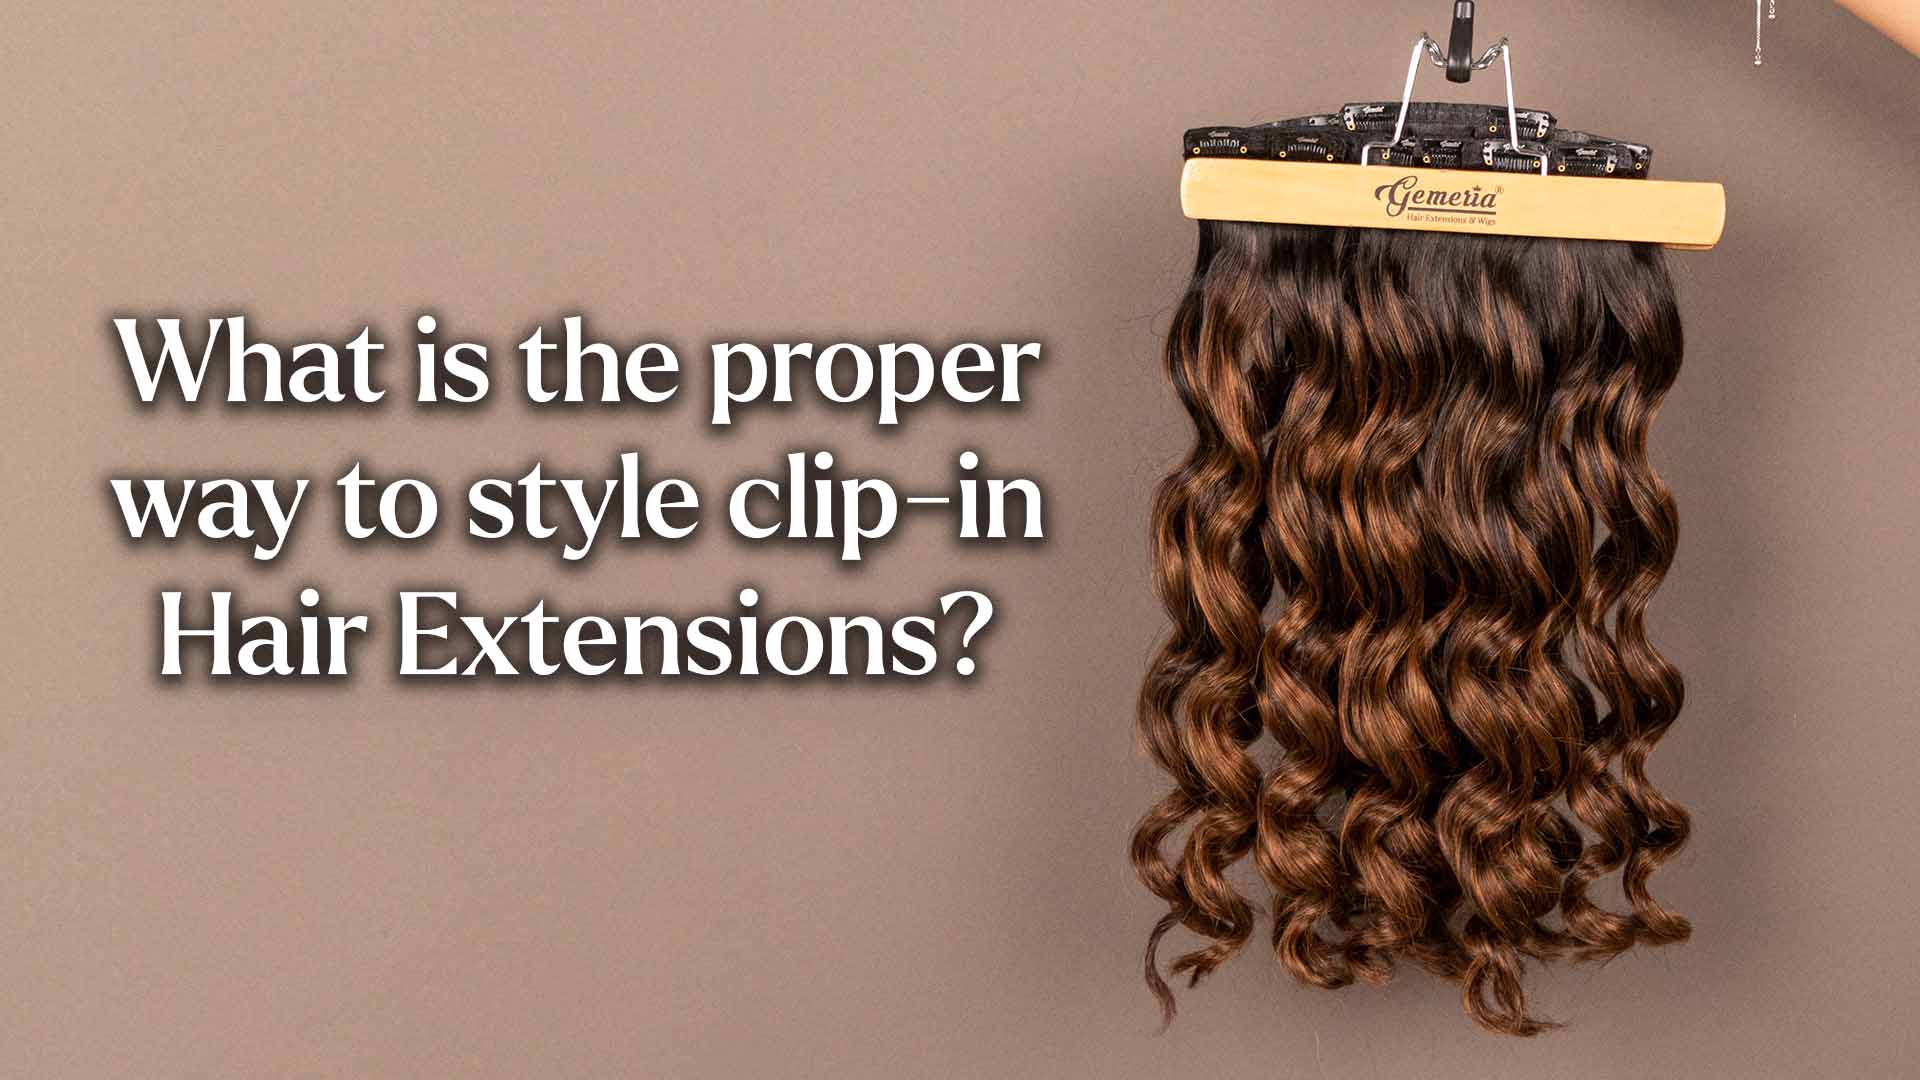 What is the proper way to style clip-in hair extensions?